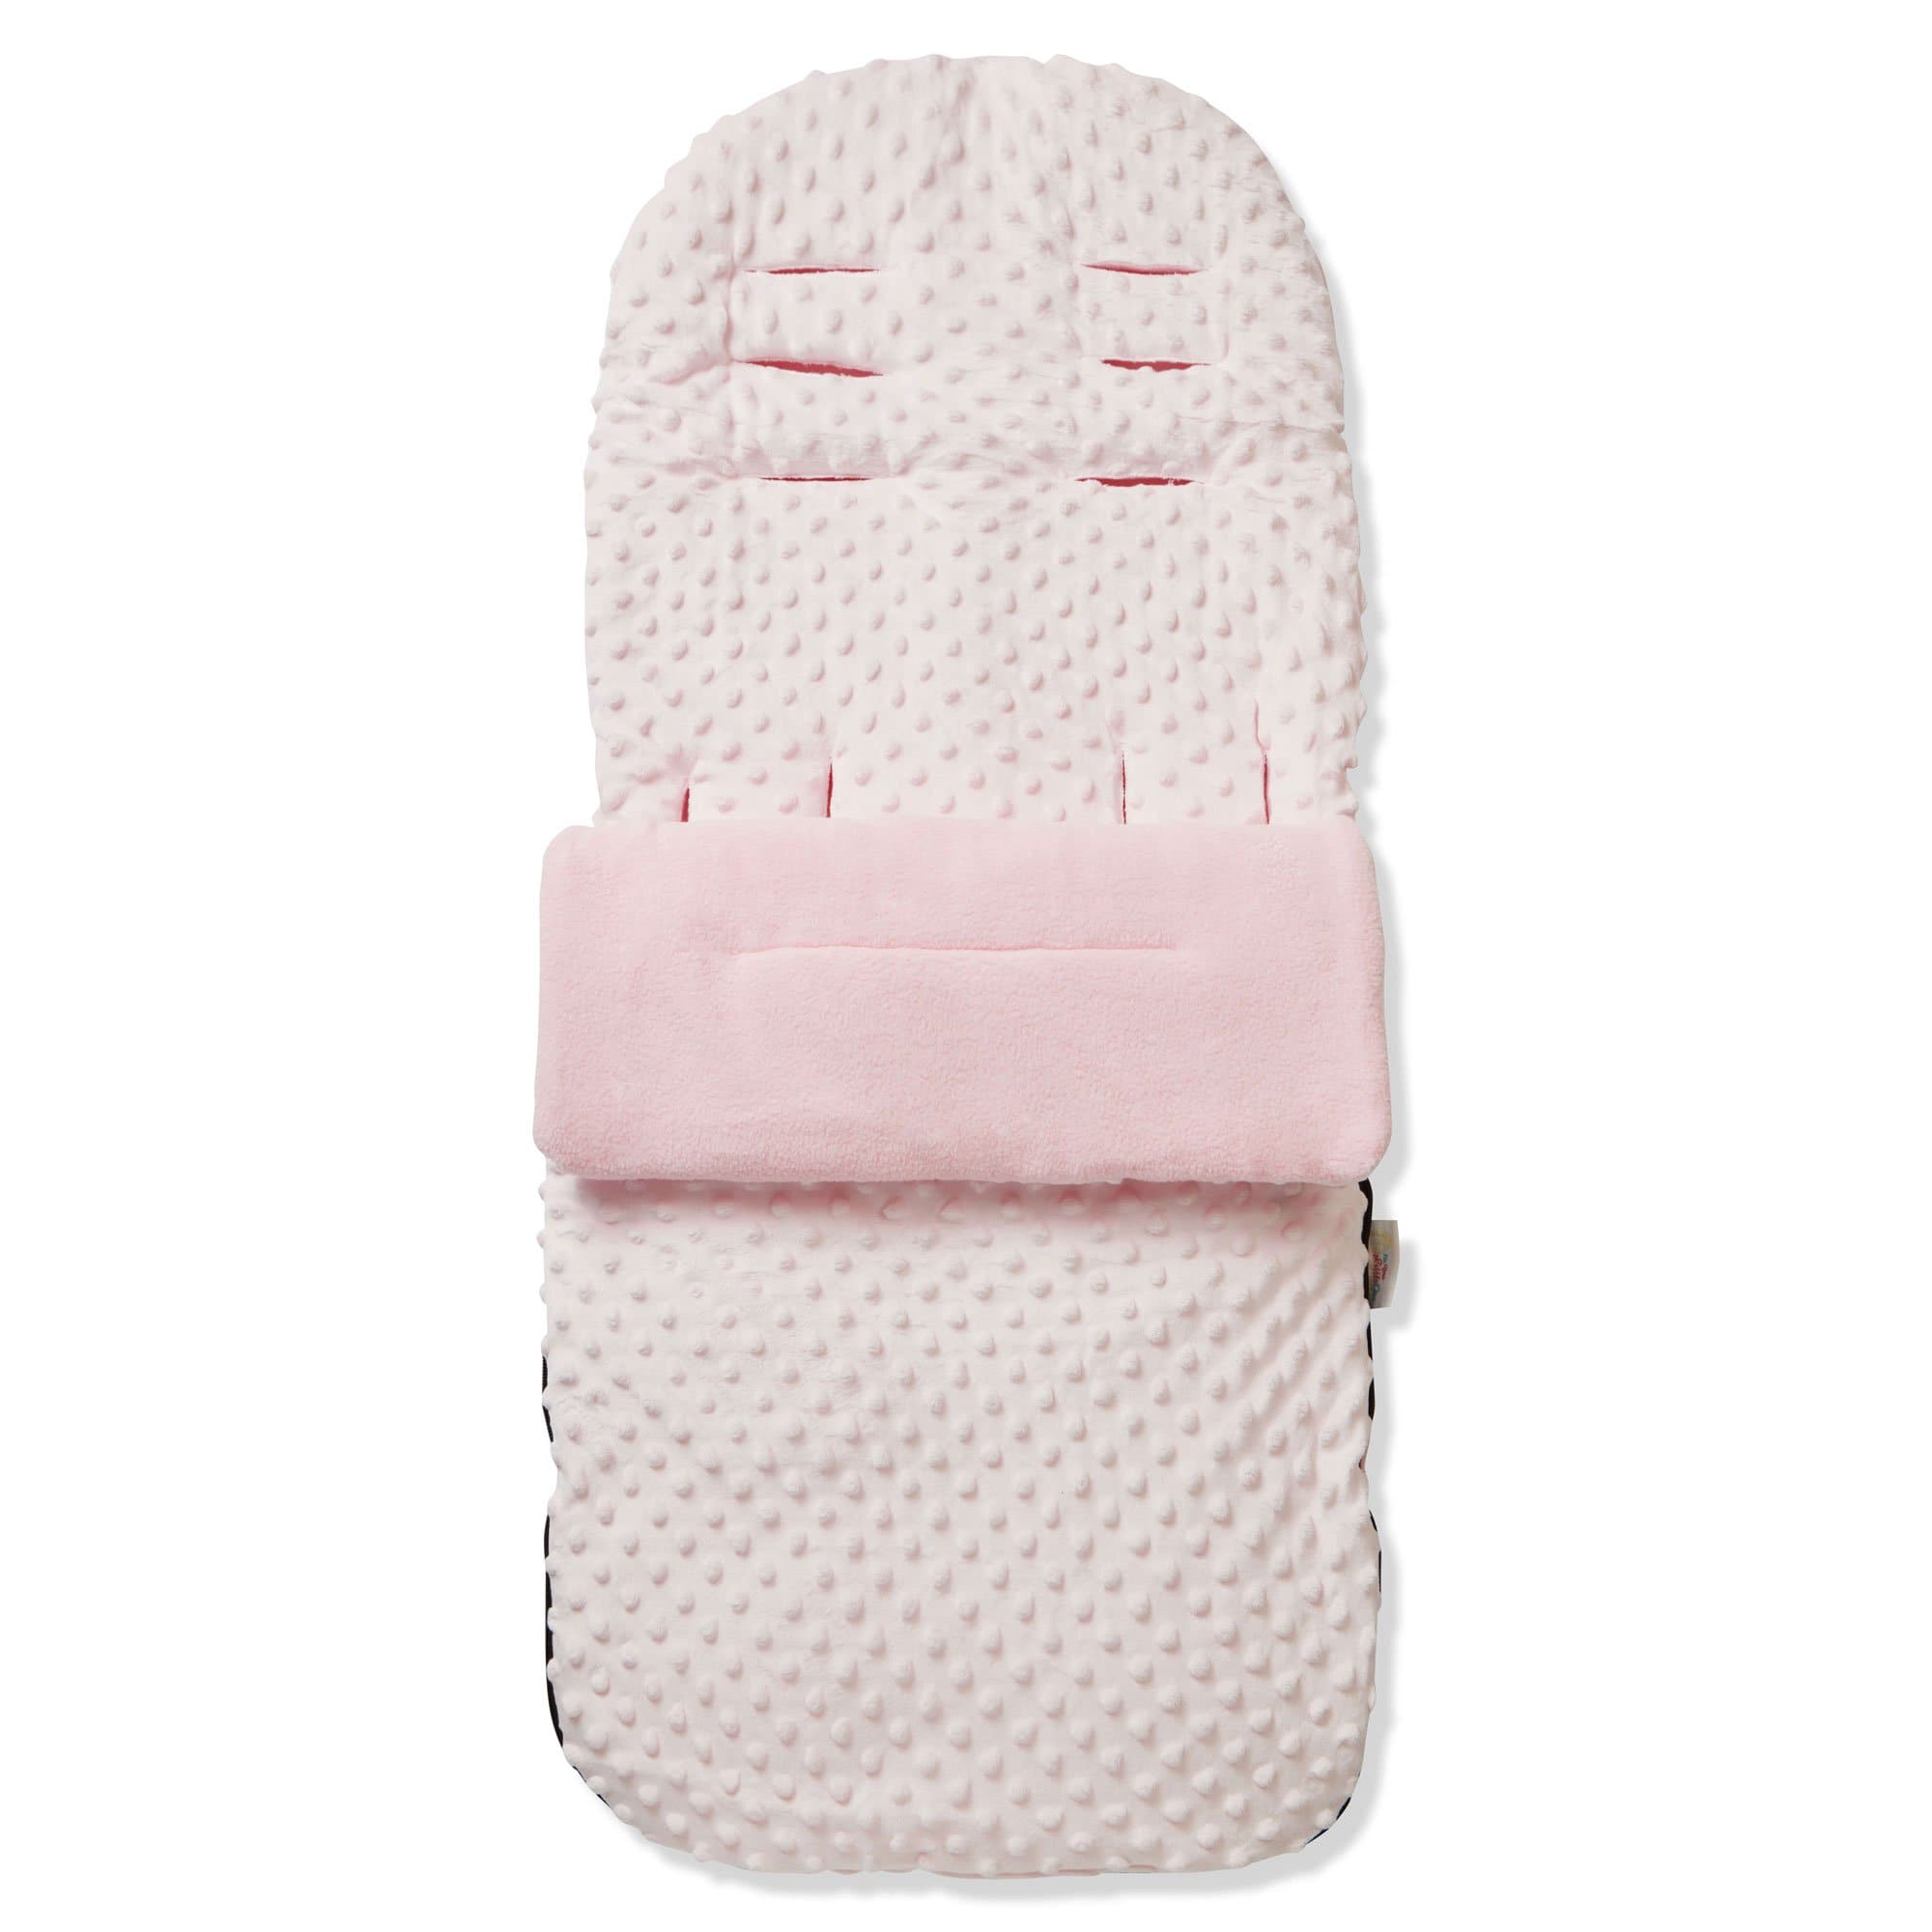 Dimple Footmuff / Cosy Toes Compatible with Easywalker - For Your Little One